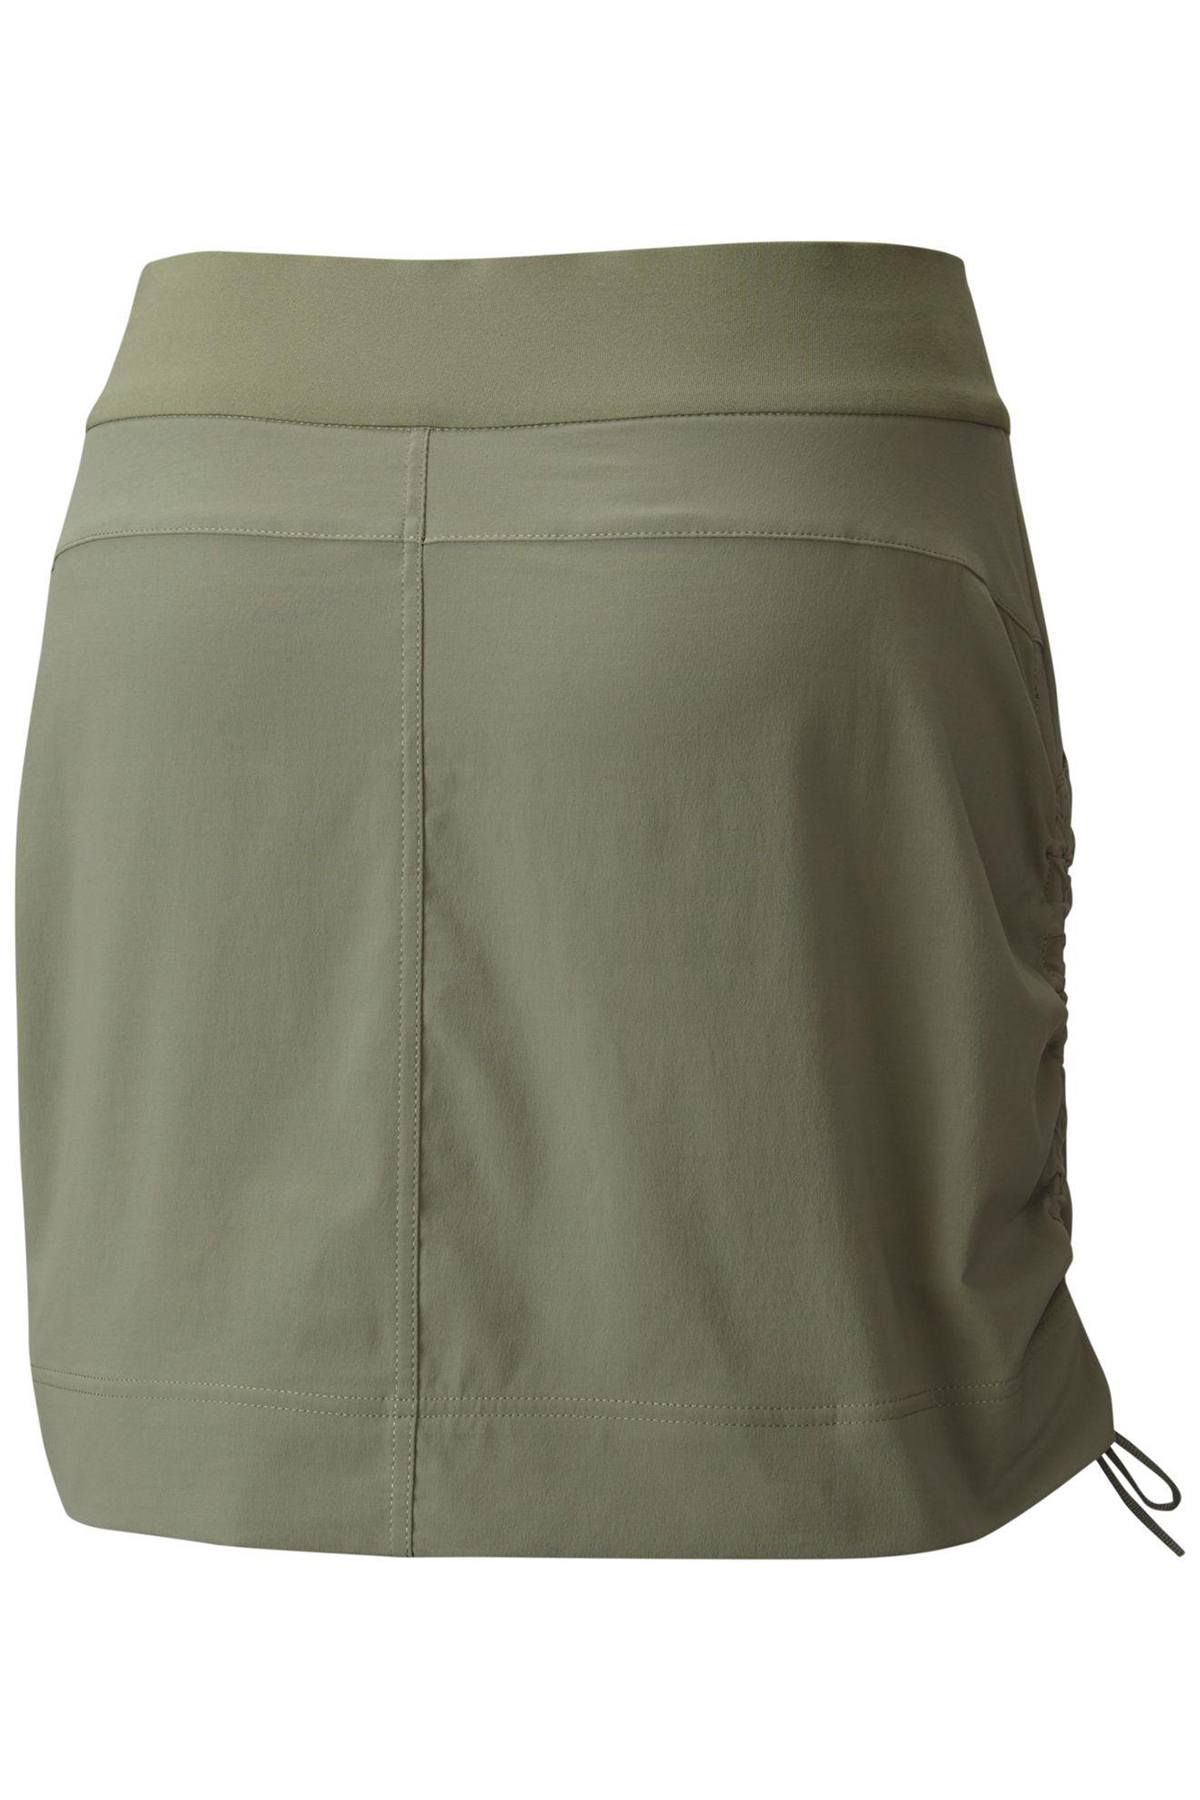 Columbia PLUS Cypress Anytime Casual Skort